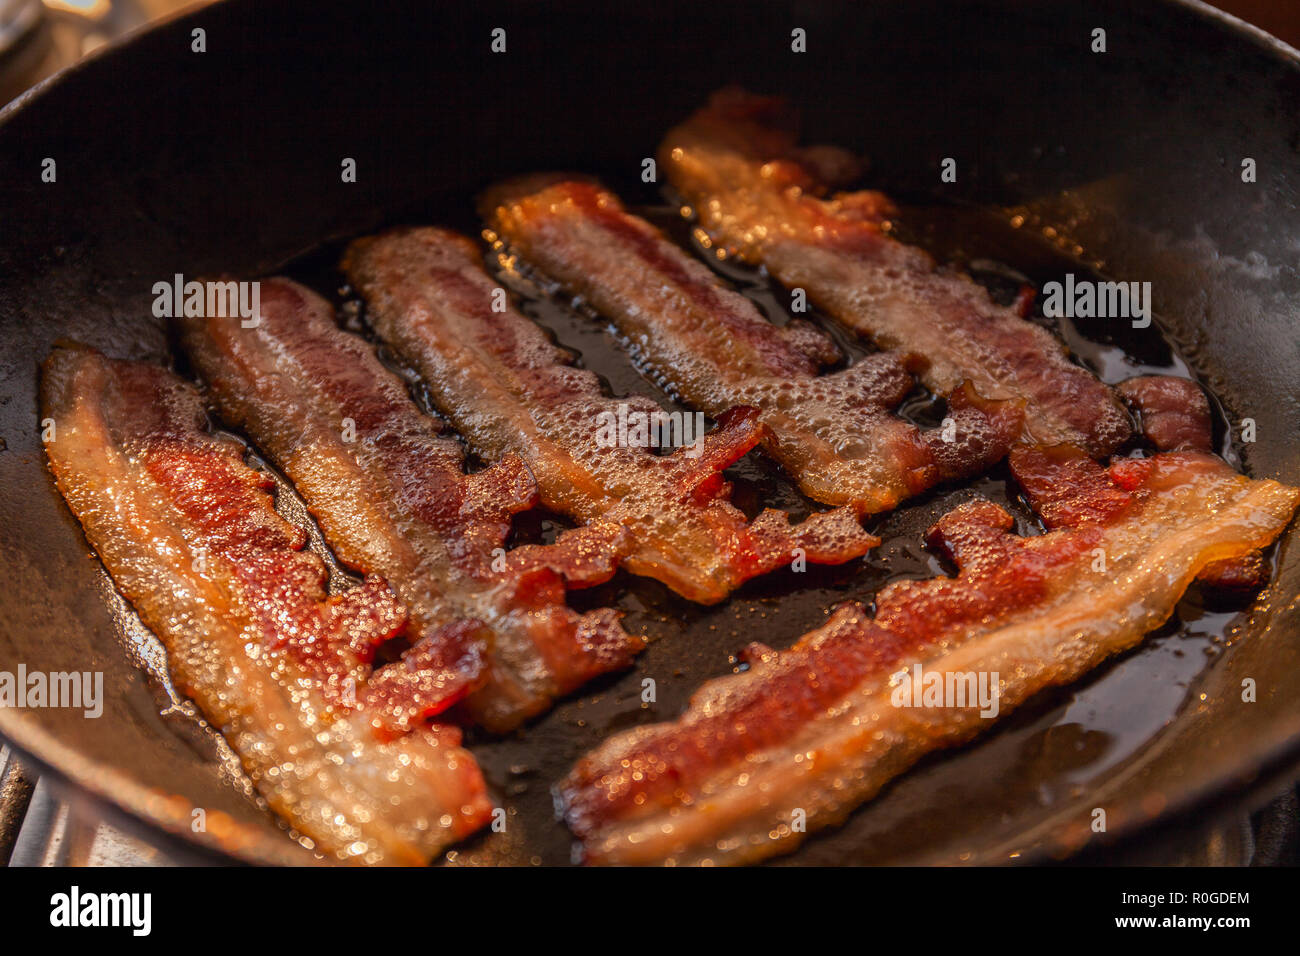 Bacon strips or rashers cooked in frying pan in the rays of sunlight Stock Photo